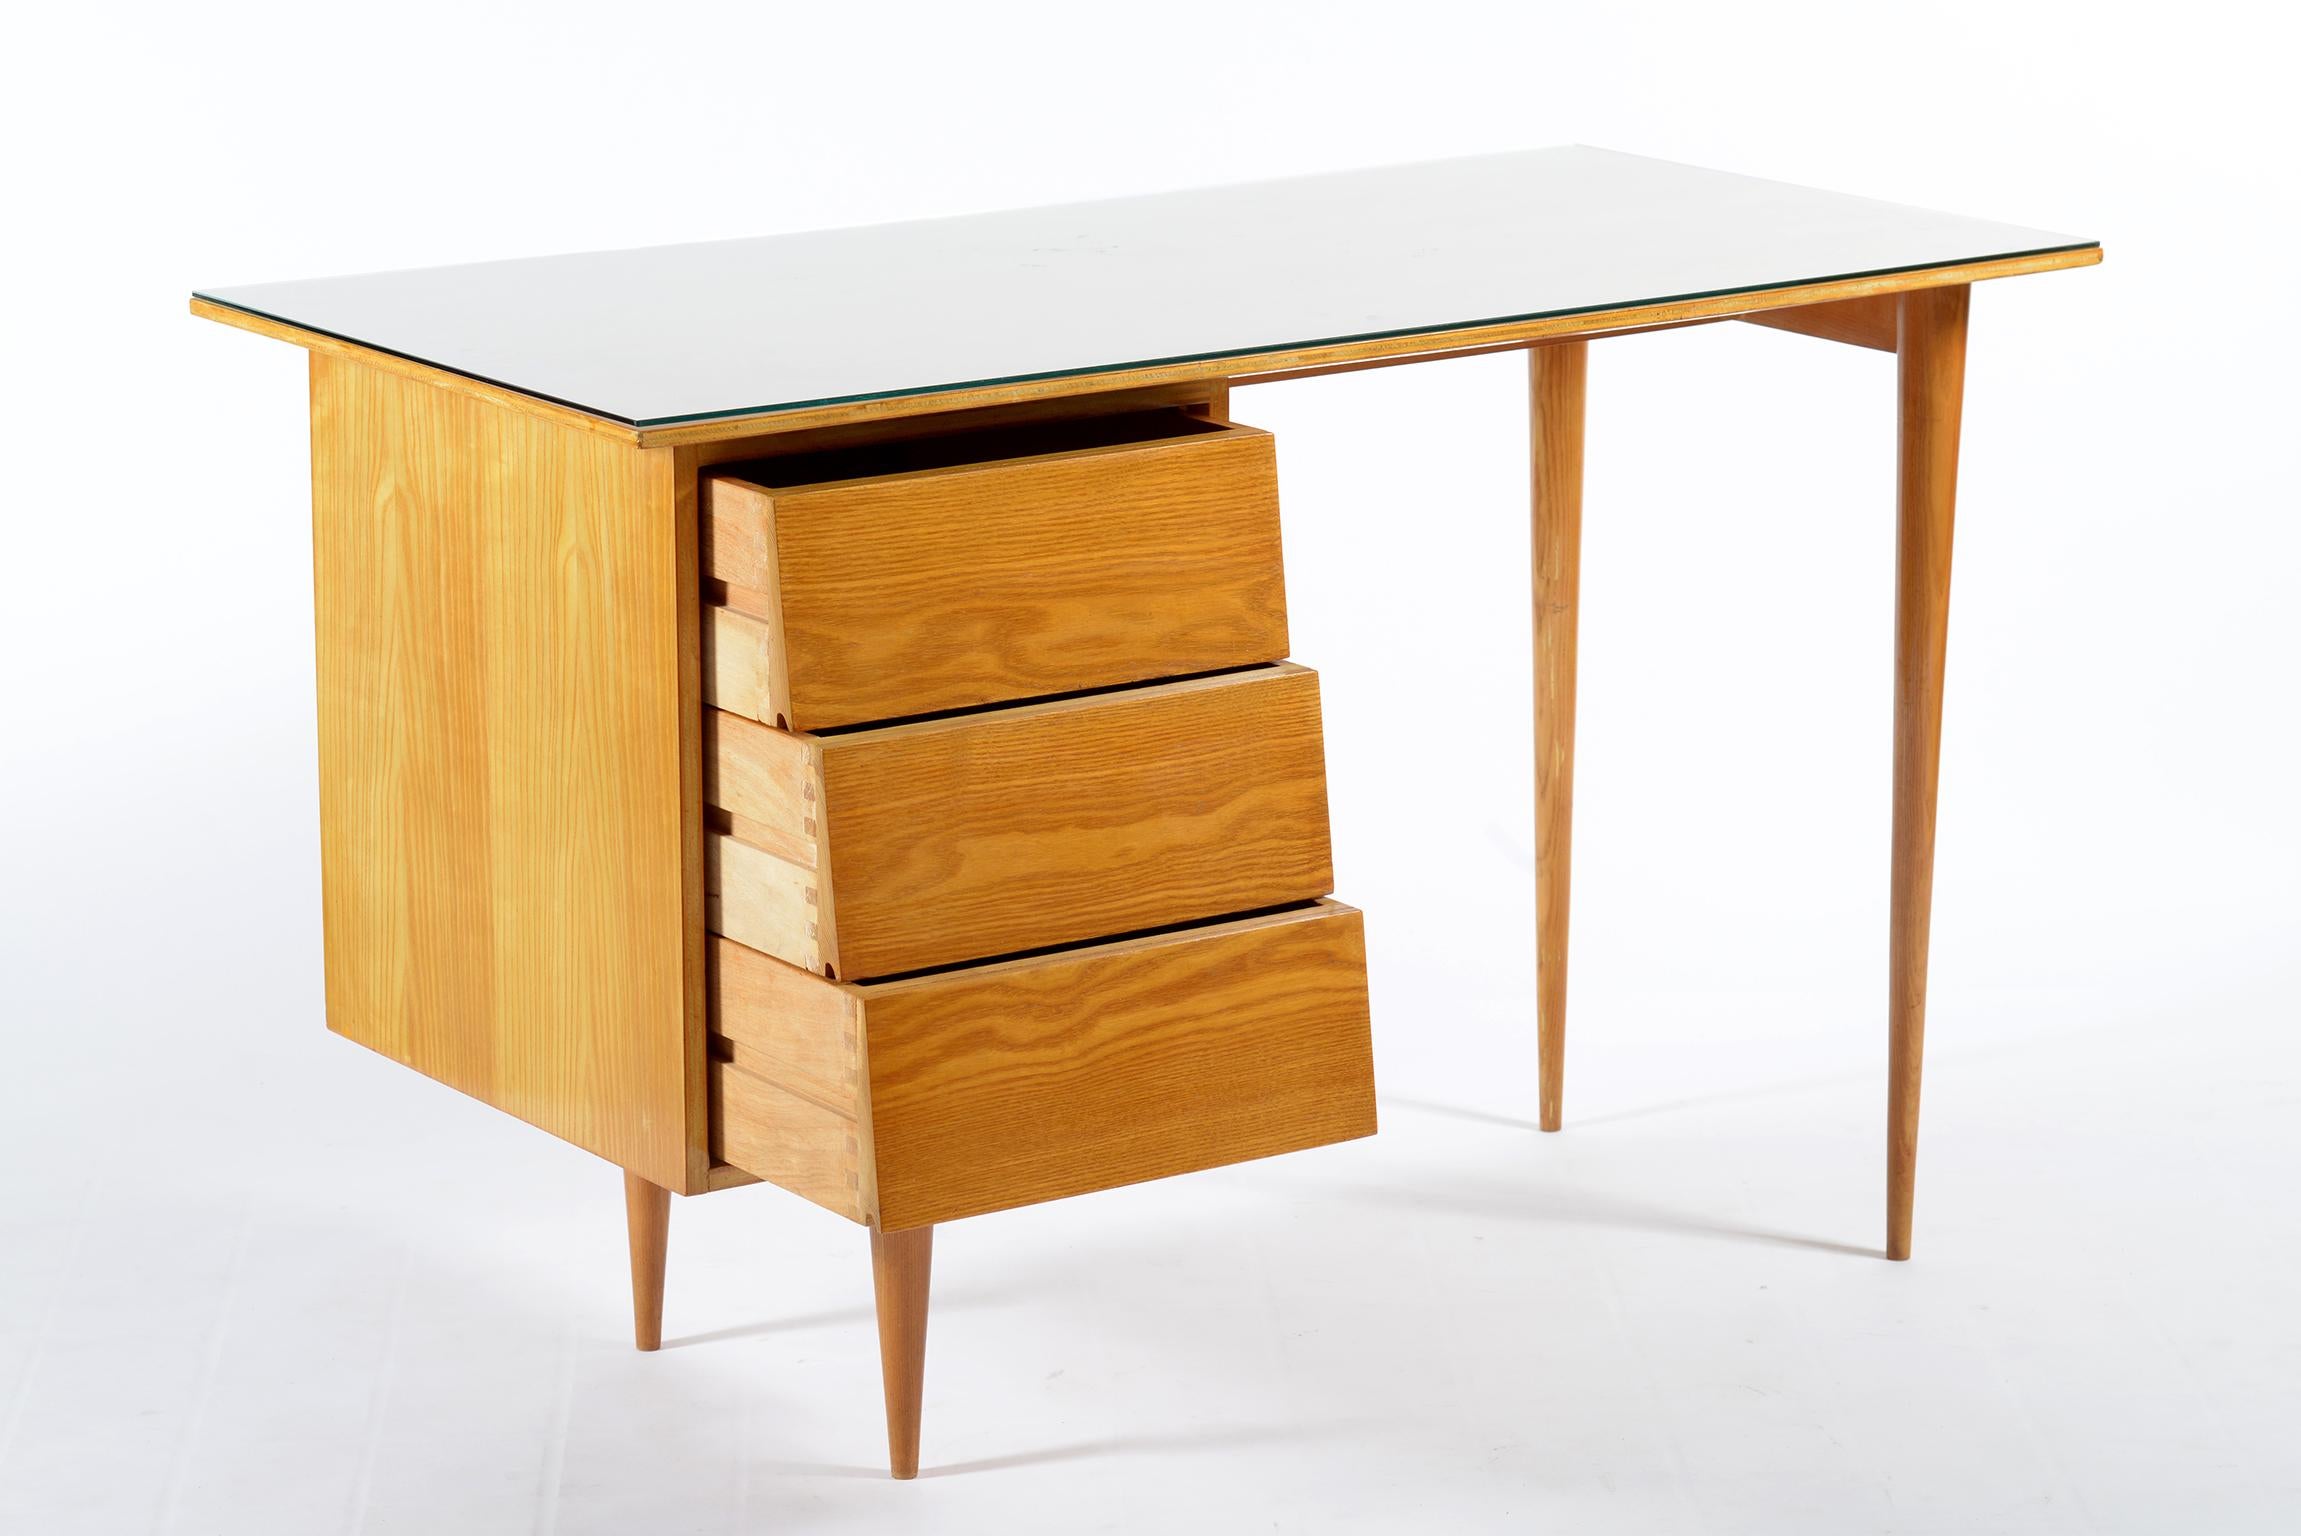 Midcentury squared writing desk by Knoll Florence international in ashwood.
Three drawers in the left side and four conical high legs, glass top to protect the wood surface.
 
 